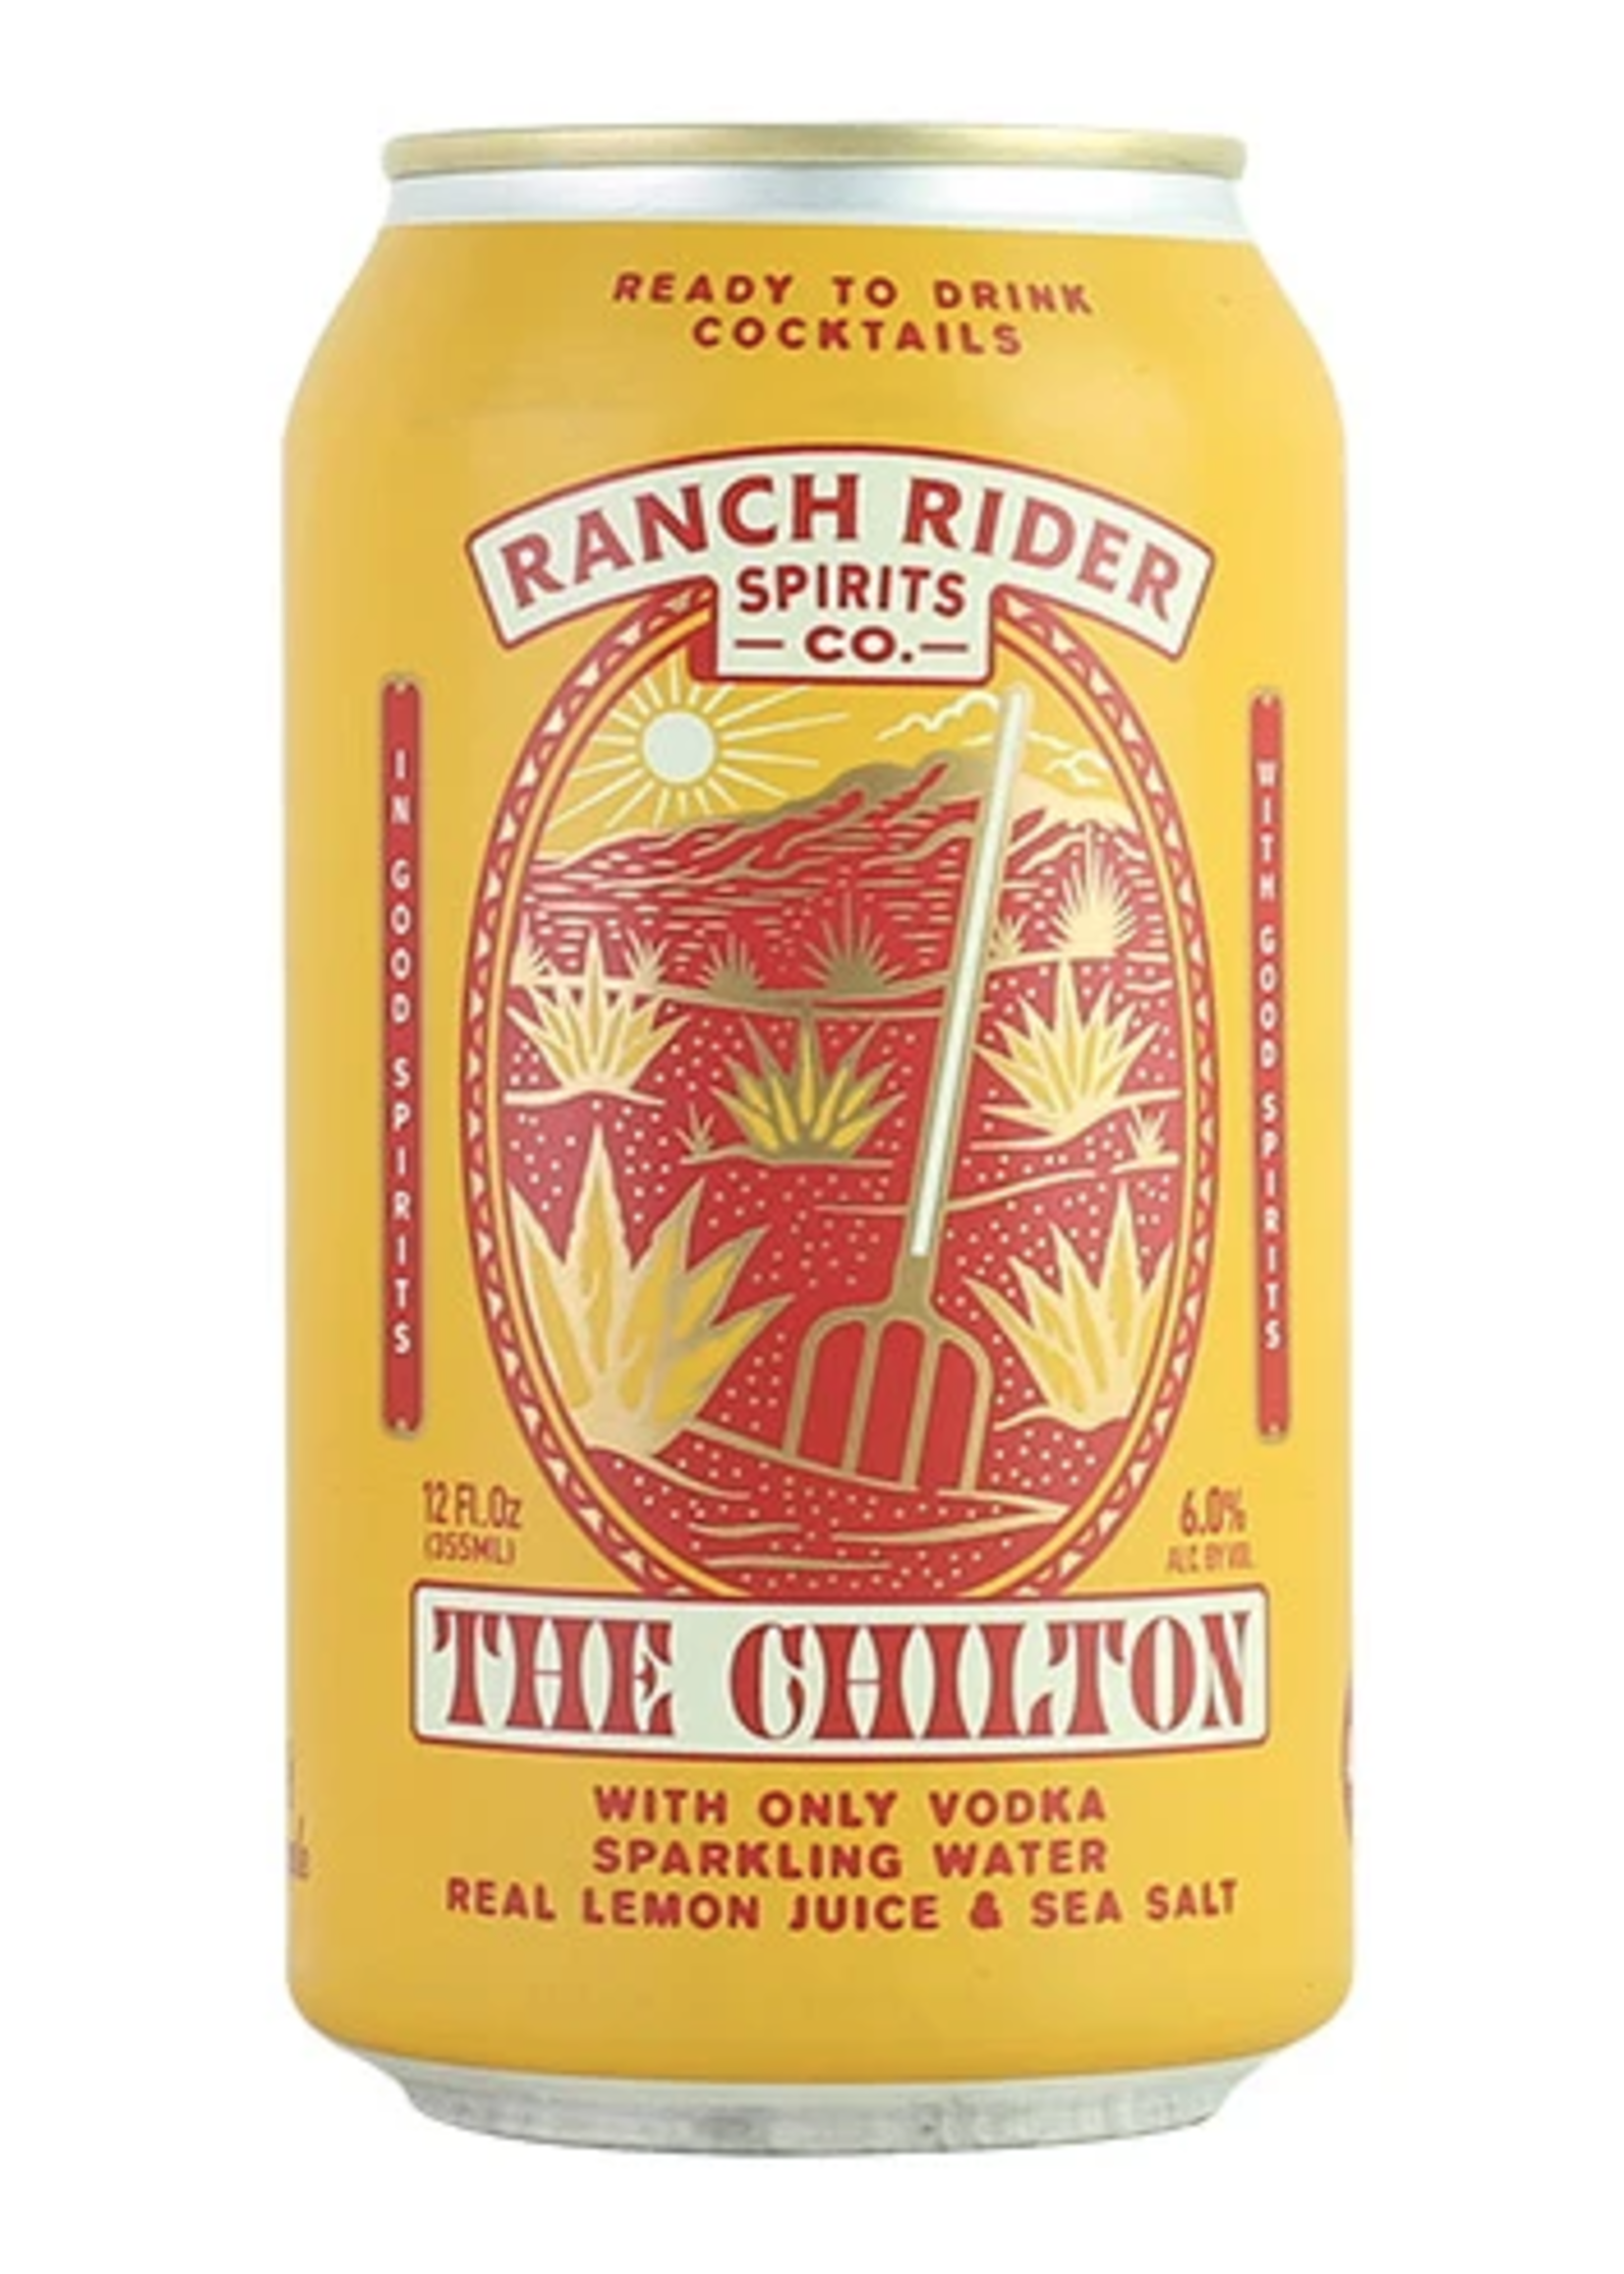 Ranch Rider Spirits Co. Ready To Drink 4Pack - Ranch Rider Spirits Co. - The Chilton